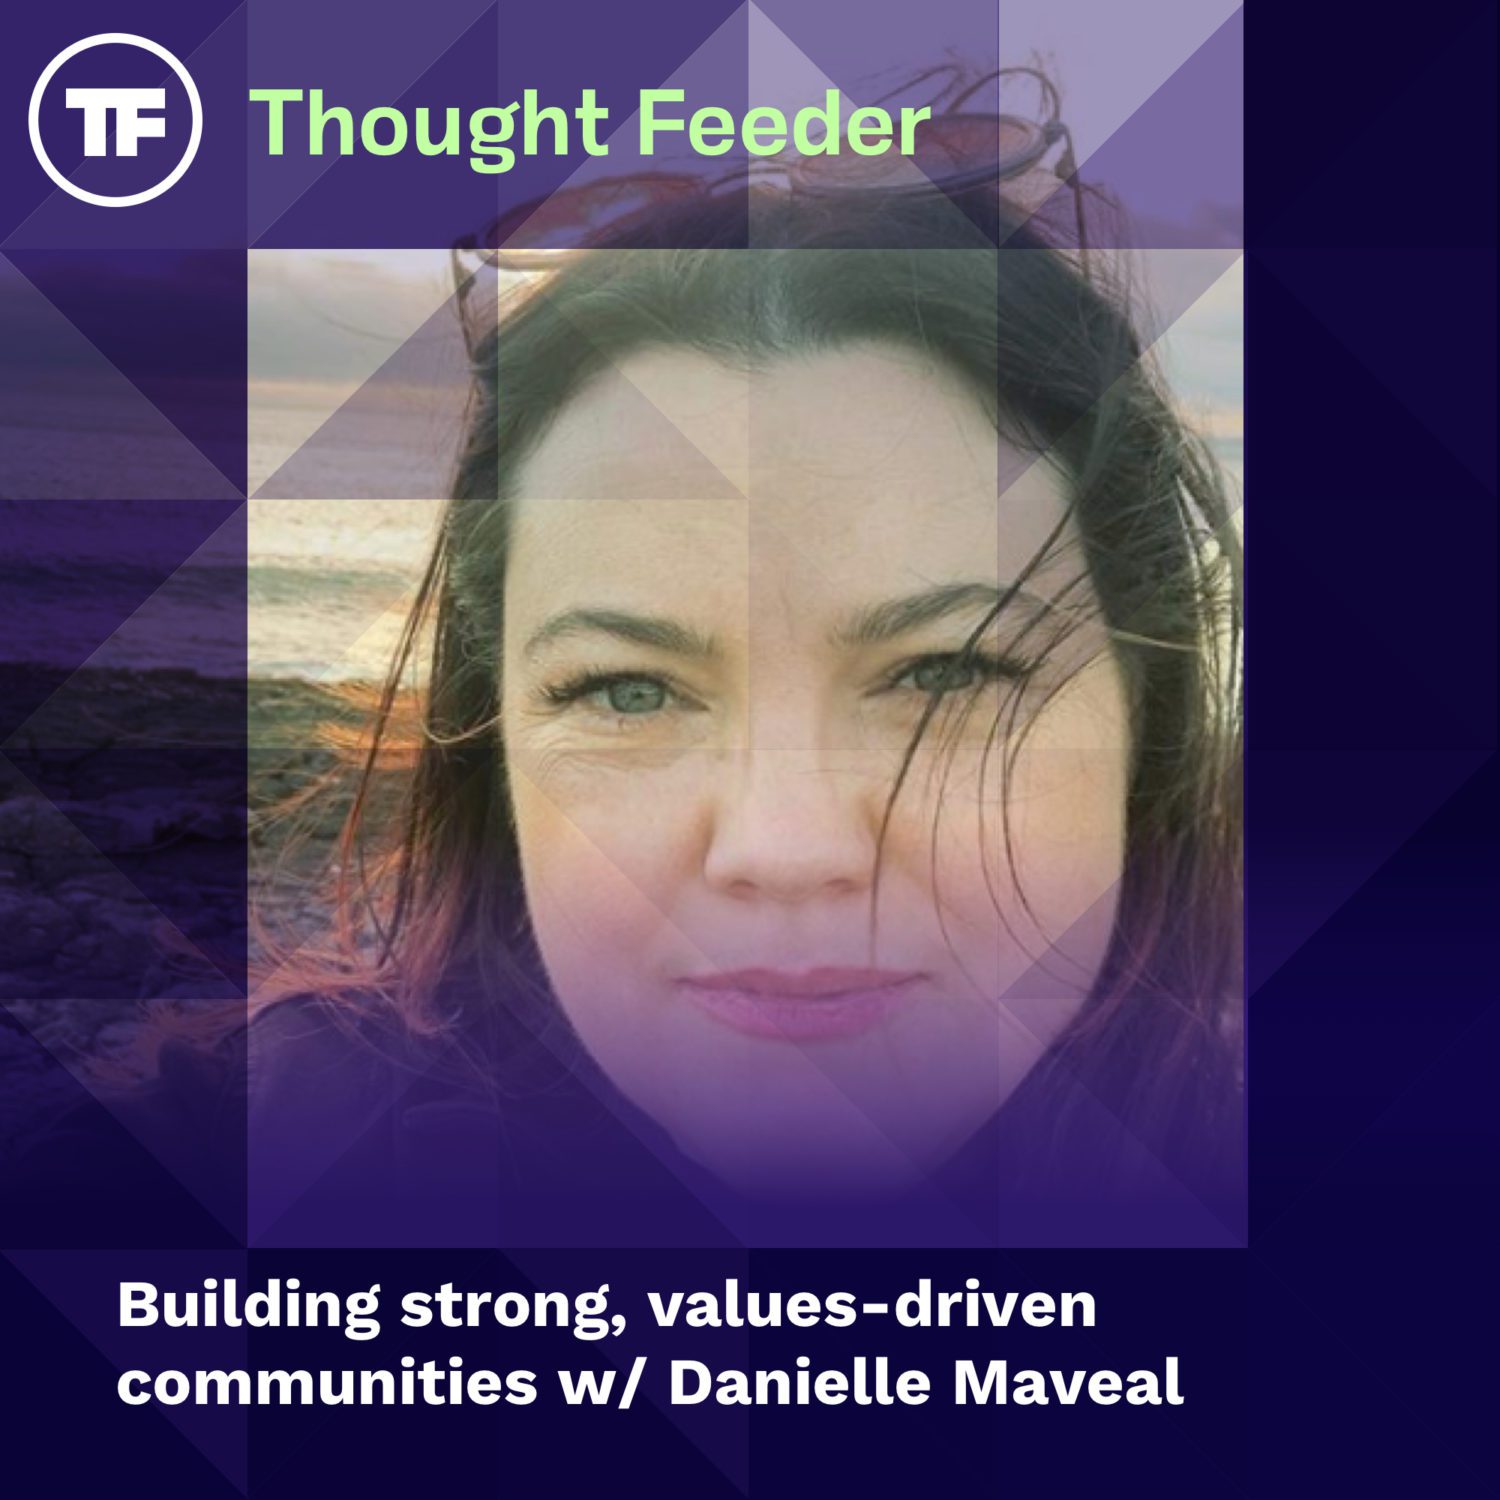 Building strong, values-driven communities with Danielle Maveal